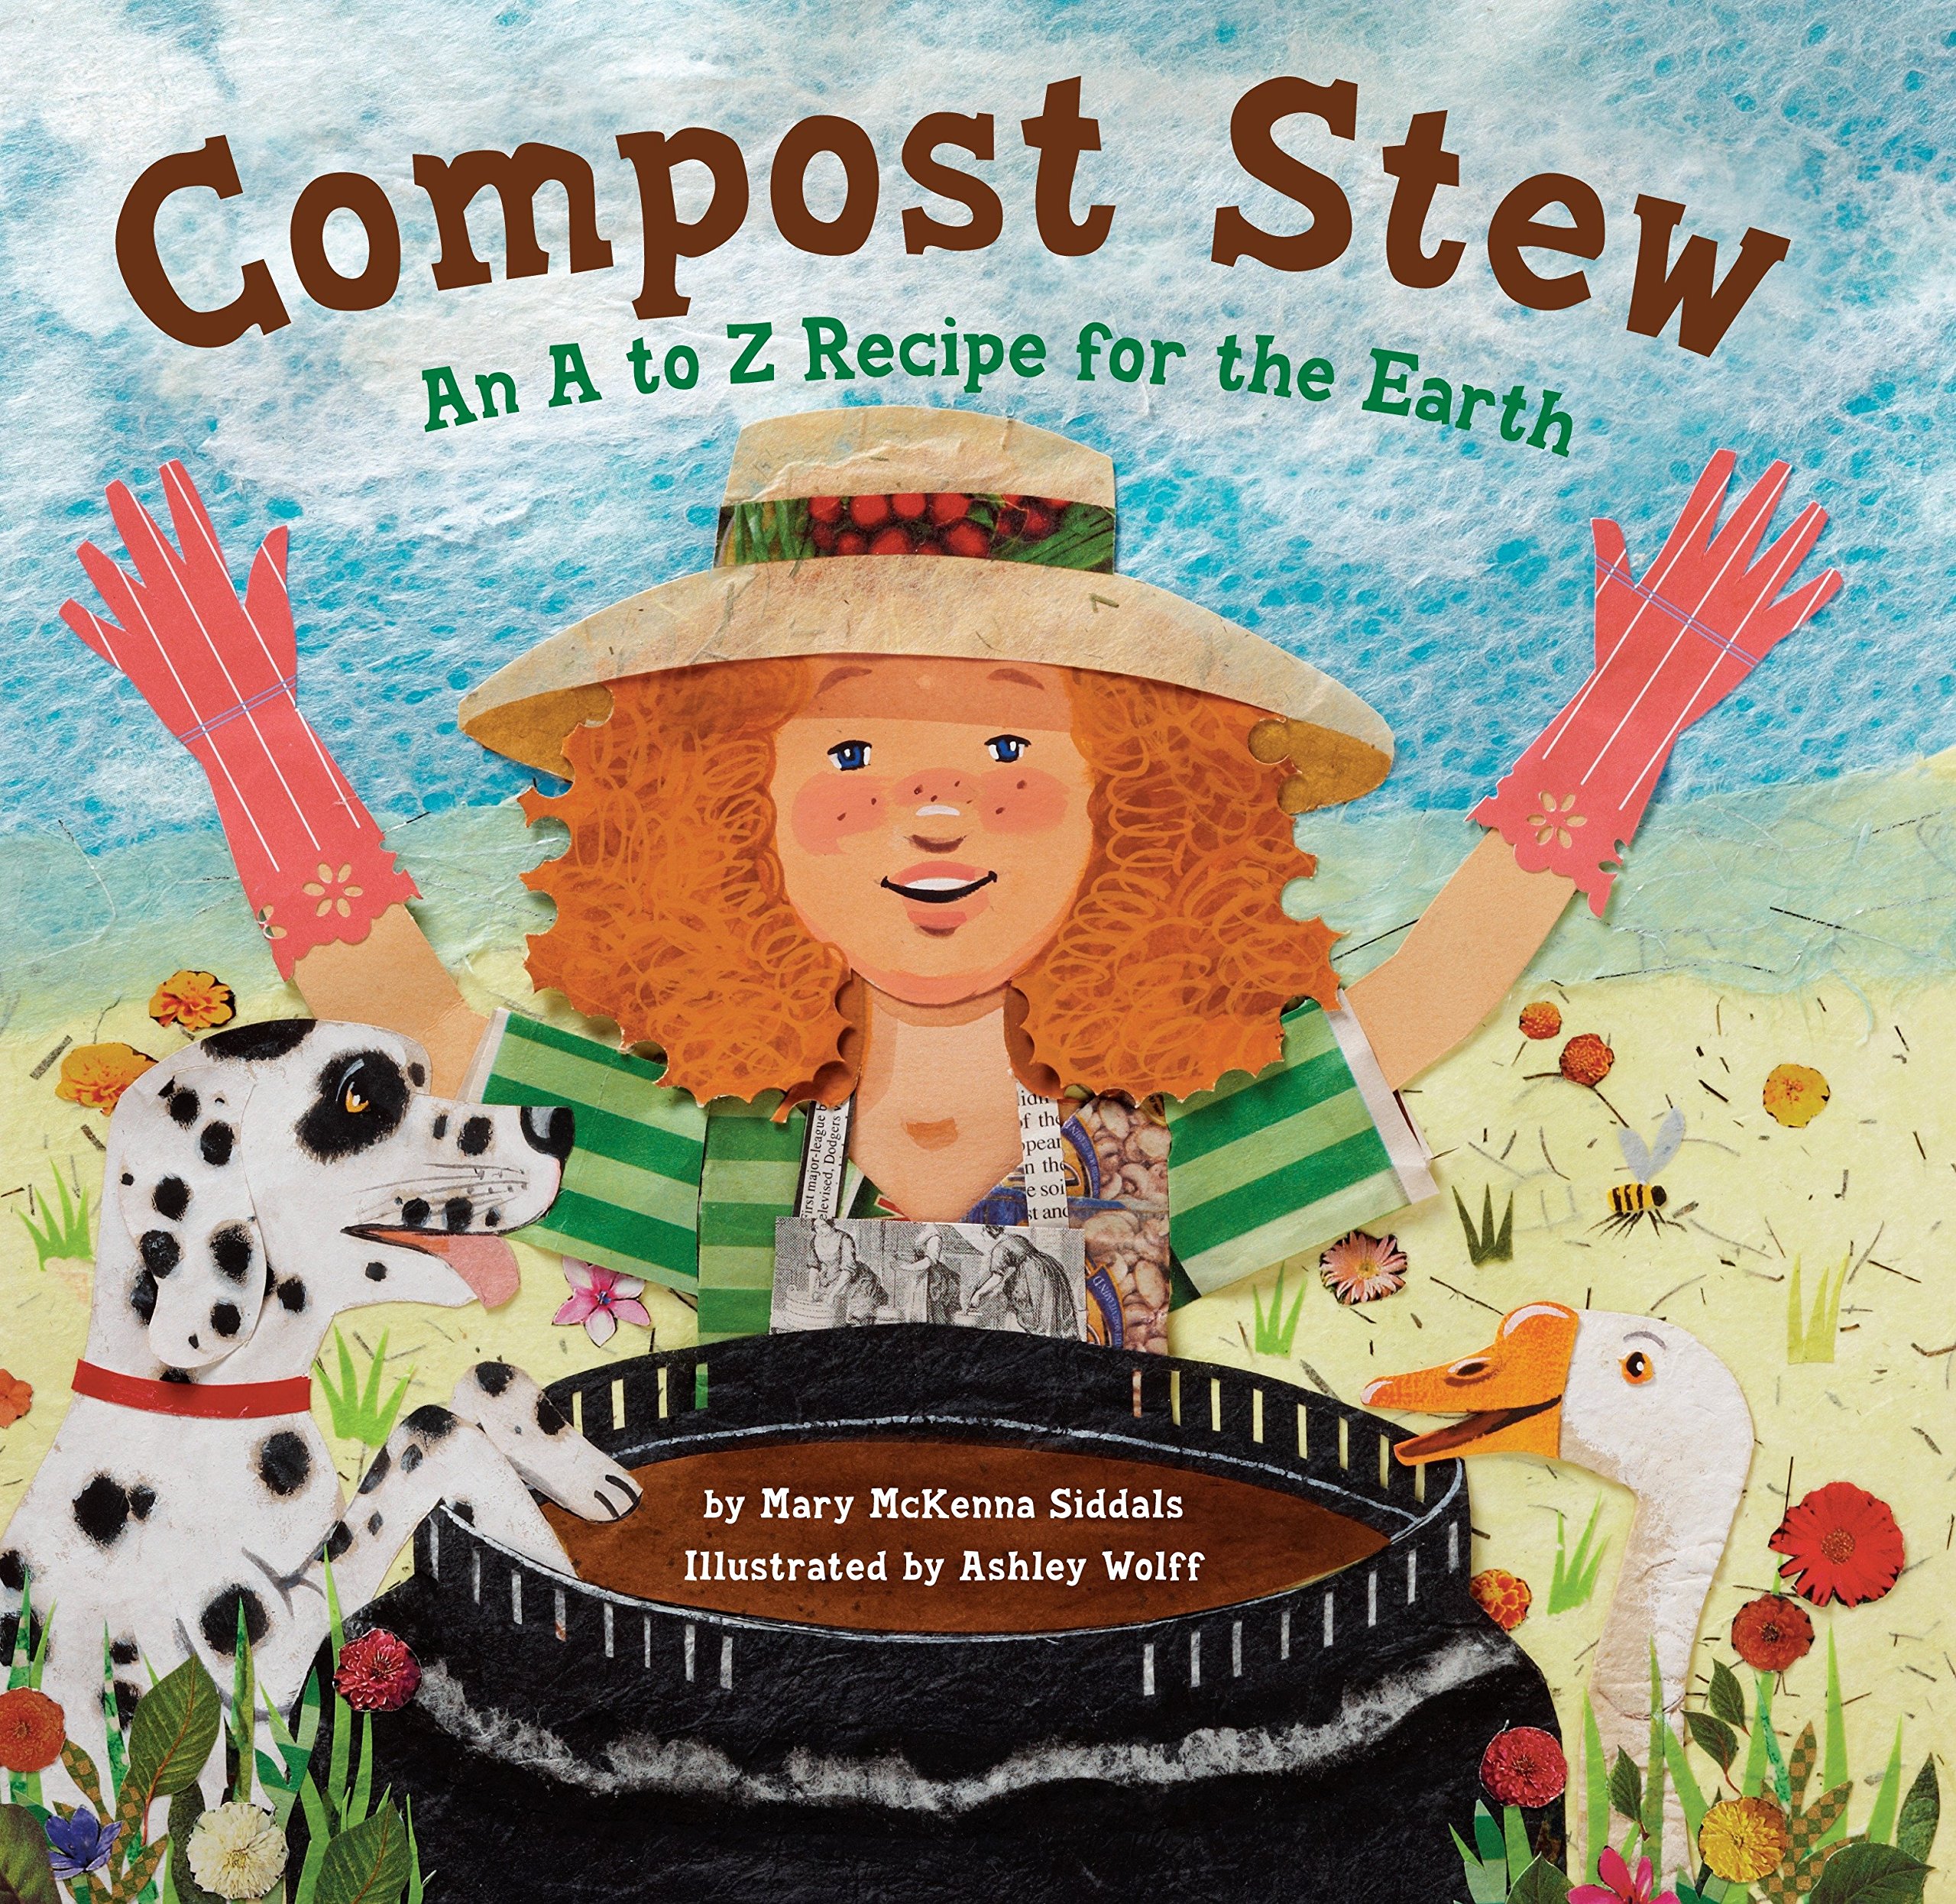 Enlace Compost Stew